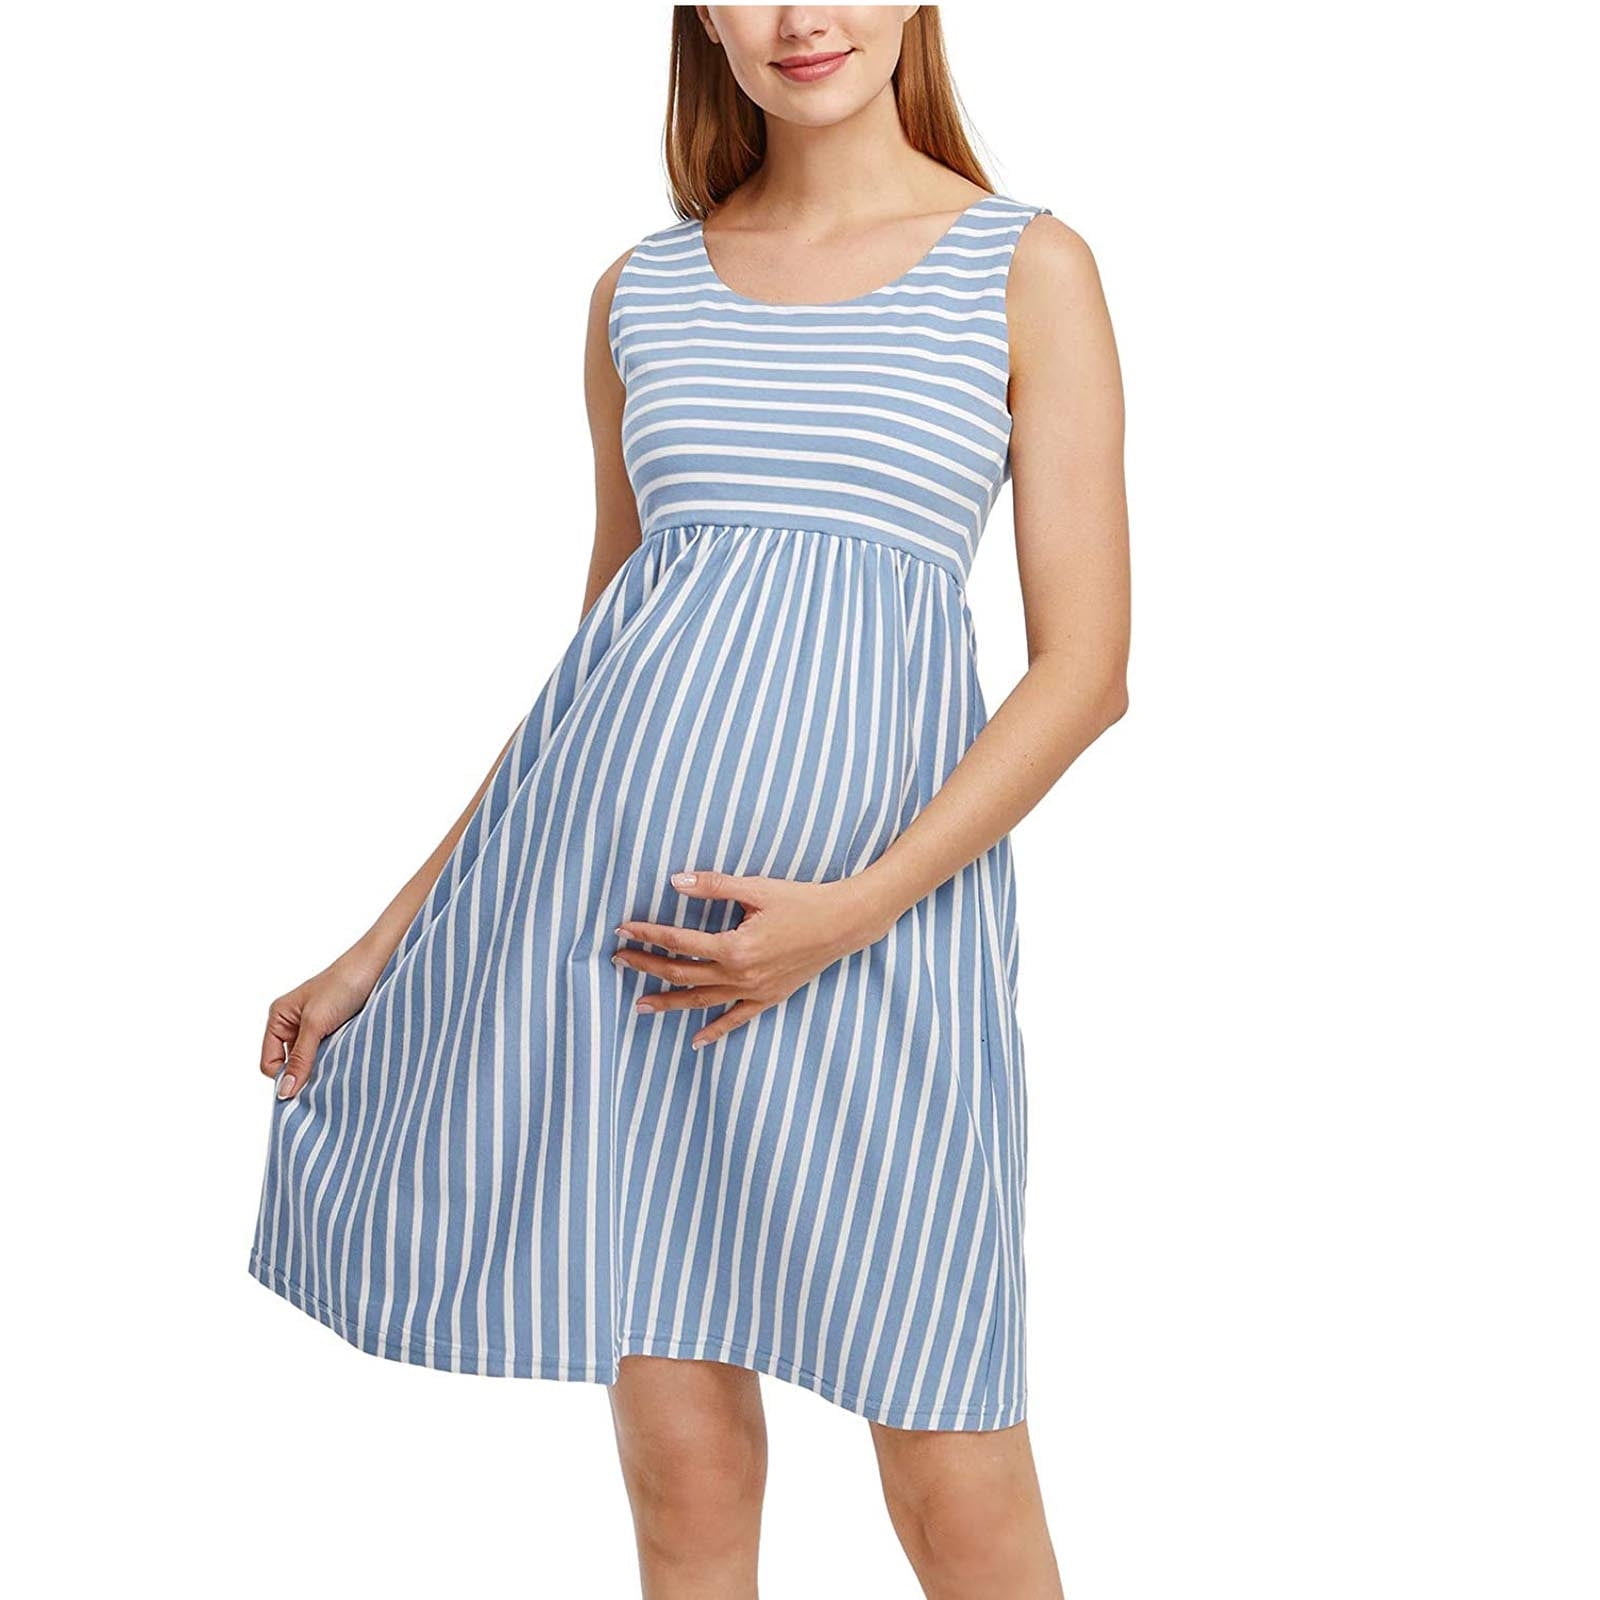 Giligiliso Clearance Maternity Clothes for Women Woman O-Neck Stripe ...